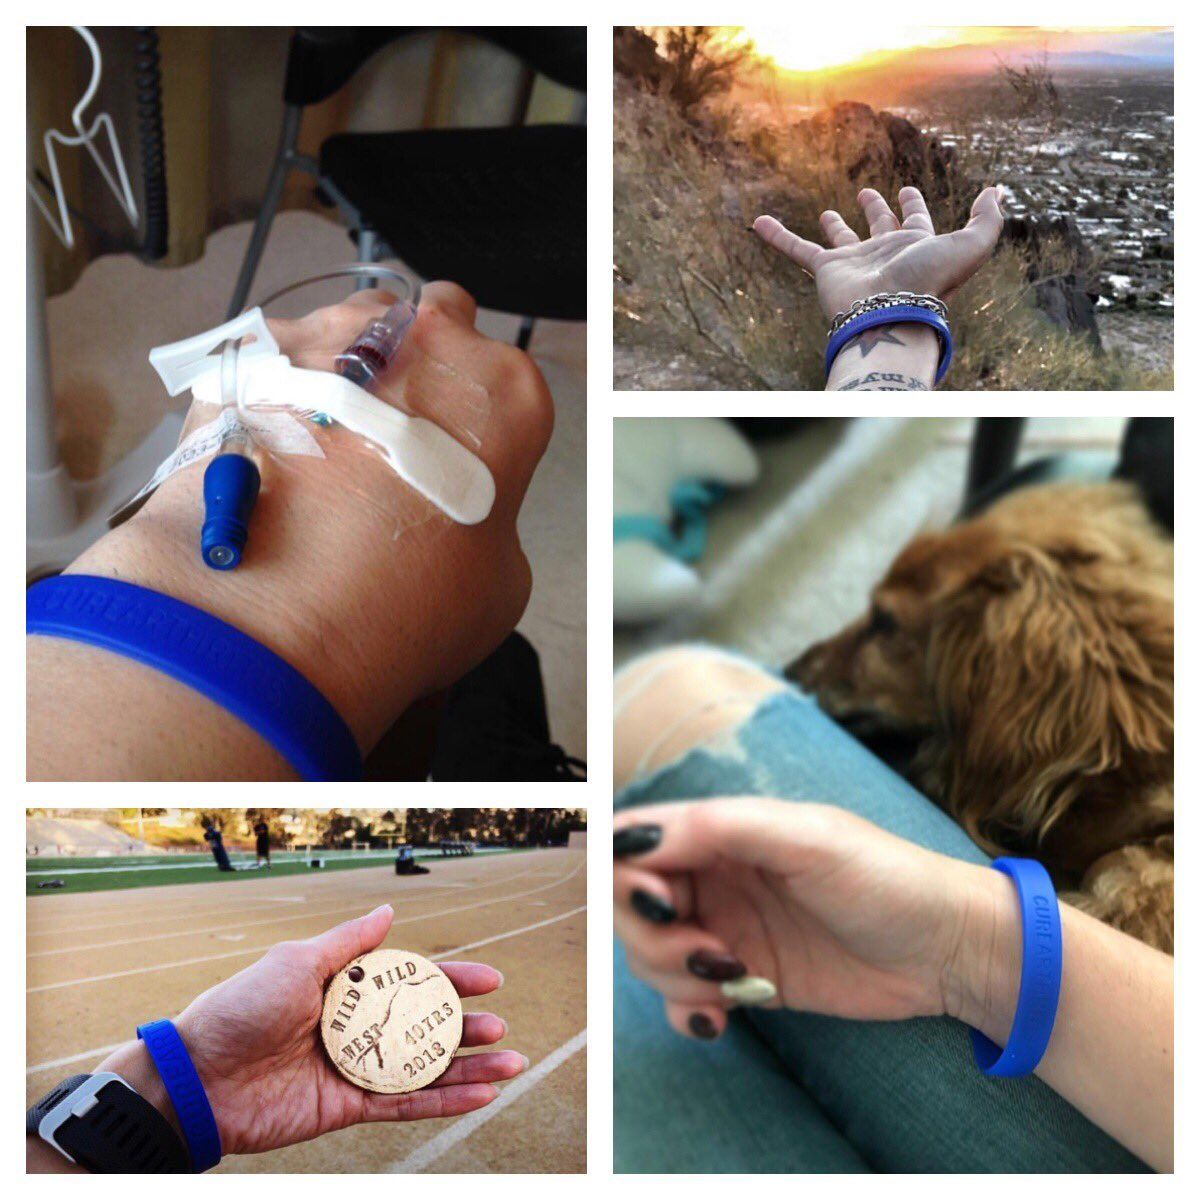 Every photo, tweet, text or conversation about #arthritis ...